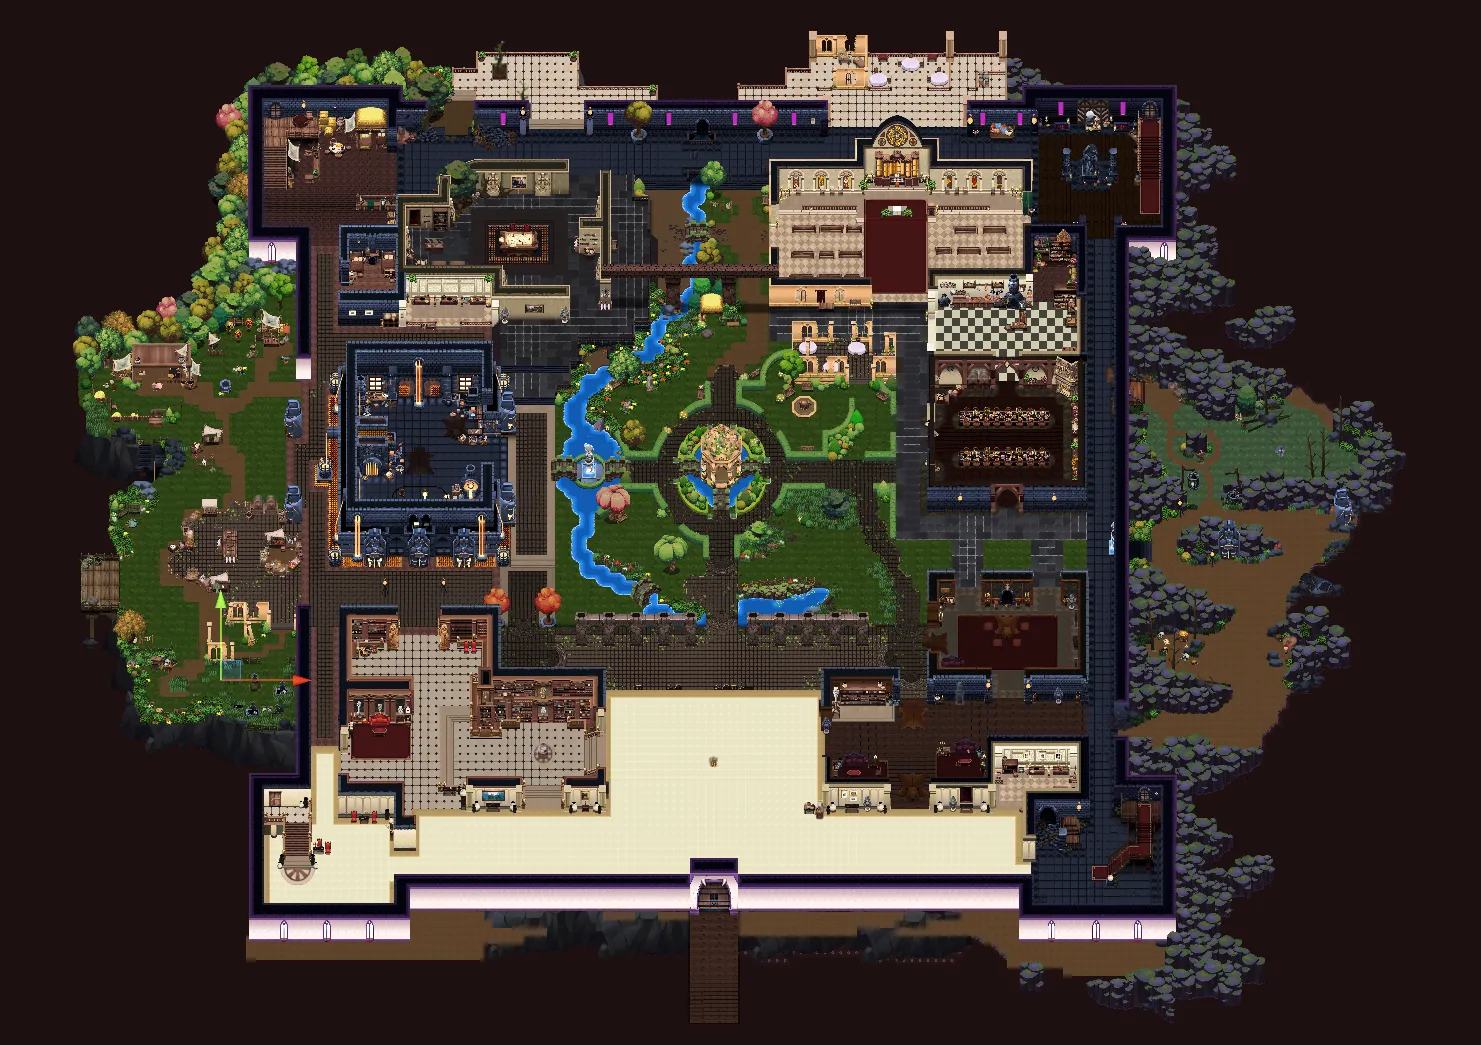 The image displays an overview of Castle of Blackwater, where players can explore, complete quests, and achieve their objectives to win the game.